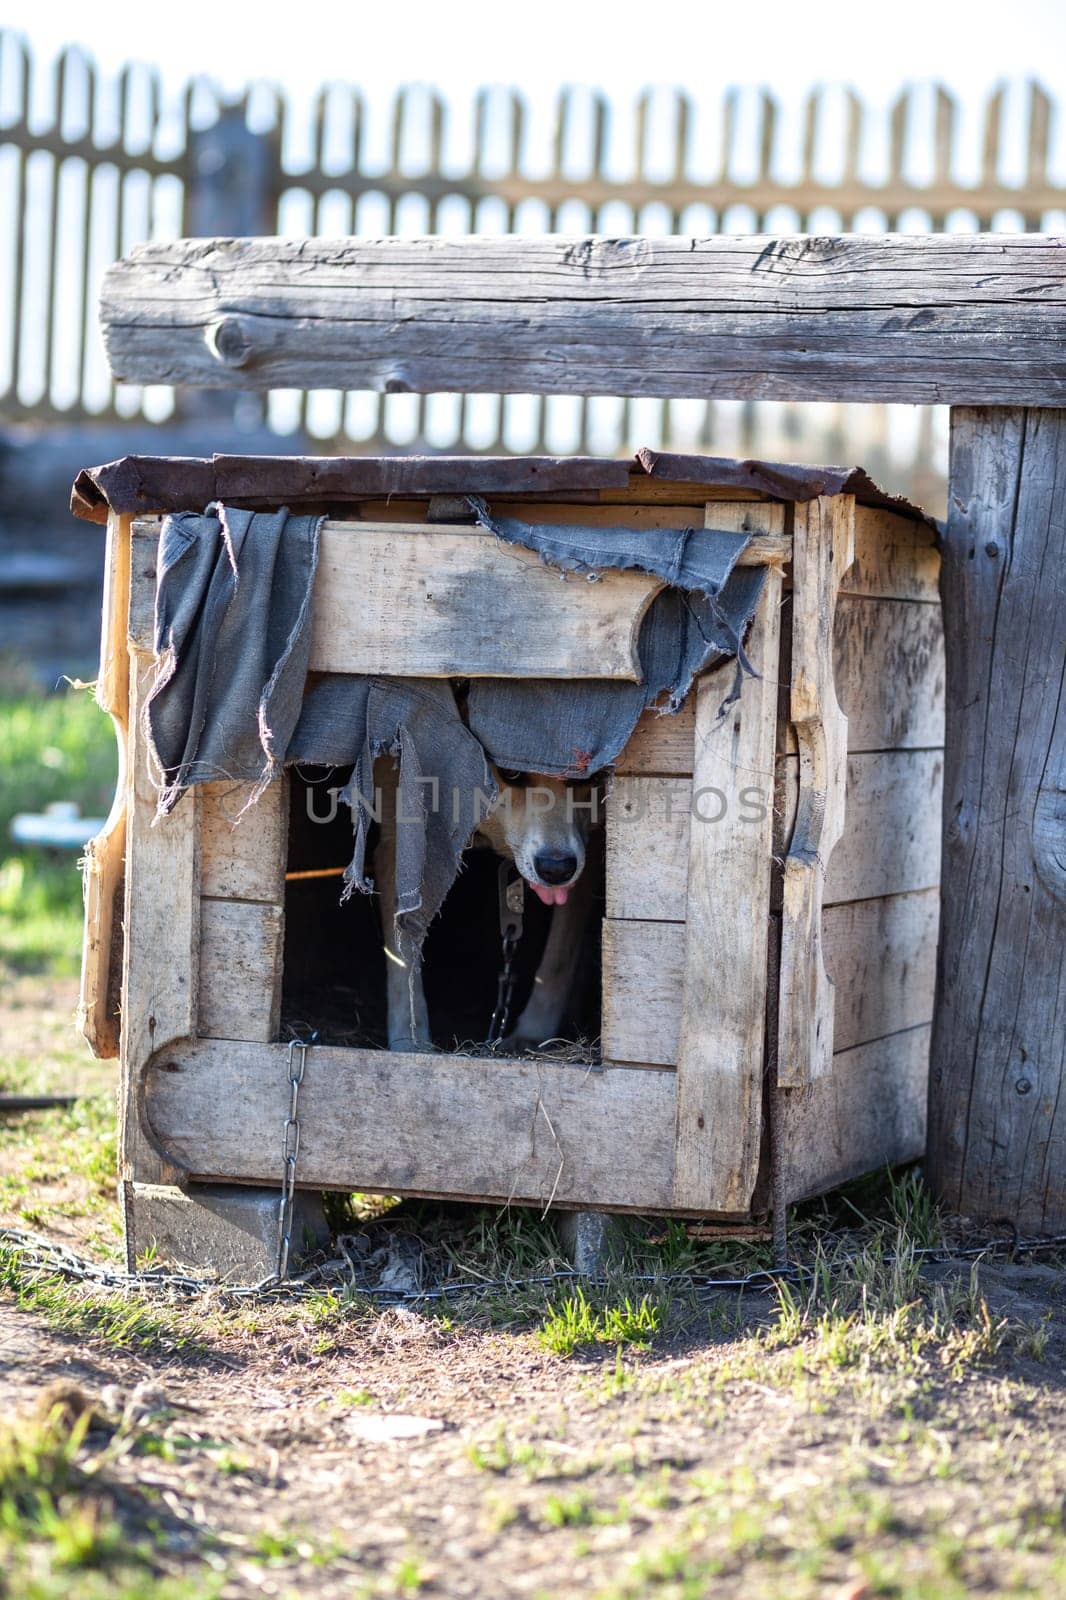 A cheerful big dog with a chain tongue hanging out sits in a booth. A dog on a chain that guards the house. Happy pet with open mouth. A simple doghouse in the background